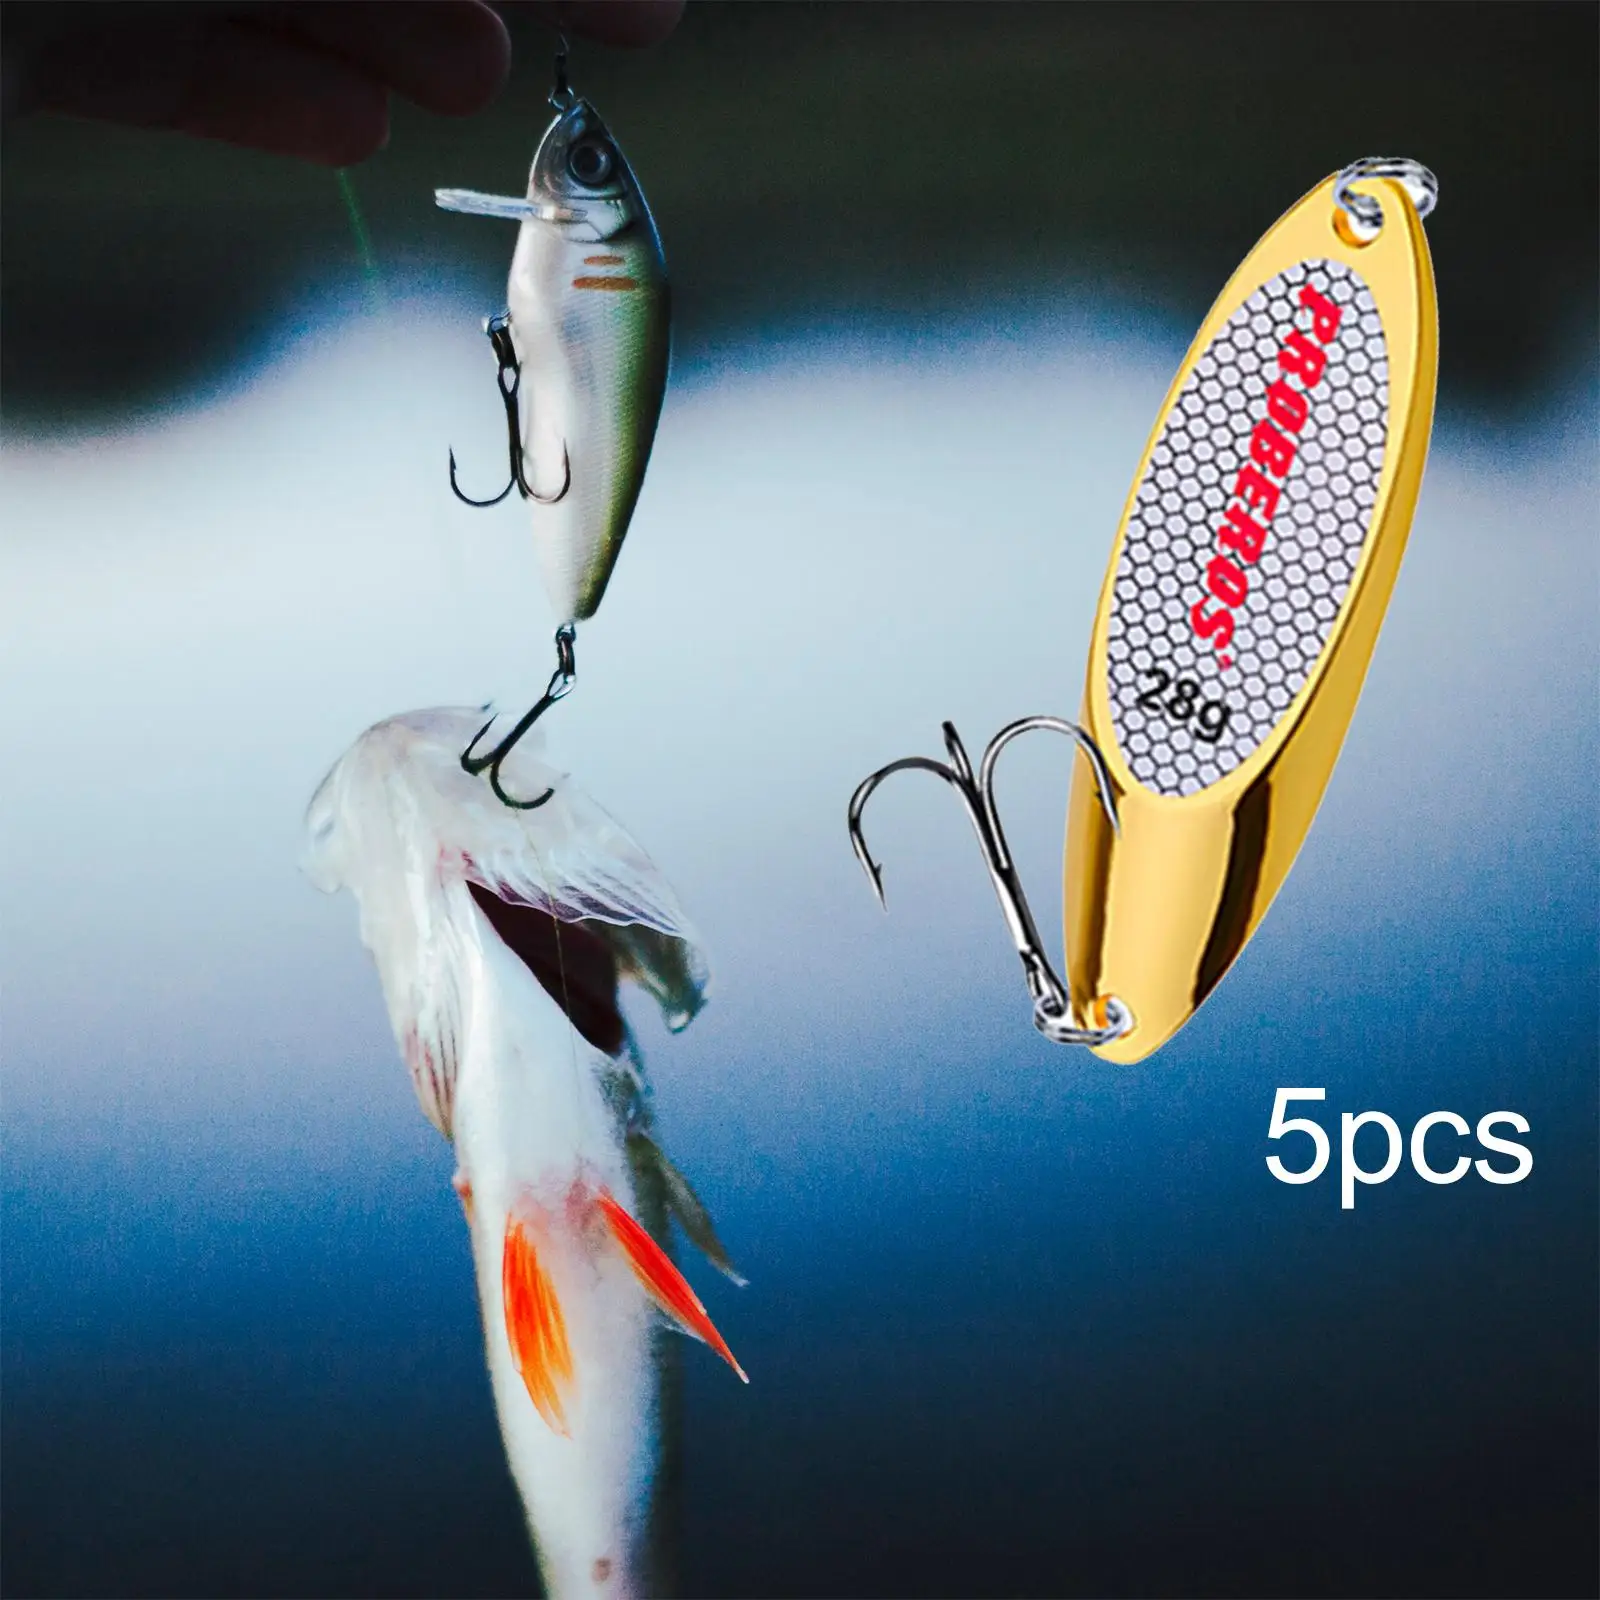 5 Pieces Fishing Spoons Lures Hard for Huge Distance Cast Bass Baits Fishing Baits for Pike Redfish Bass Trout Fishing Equipment